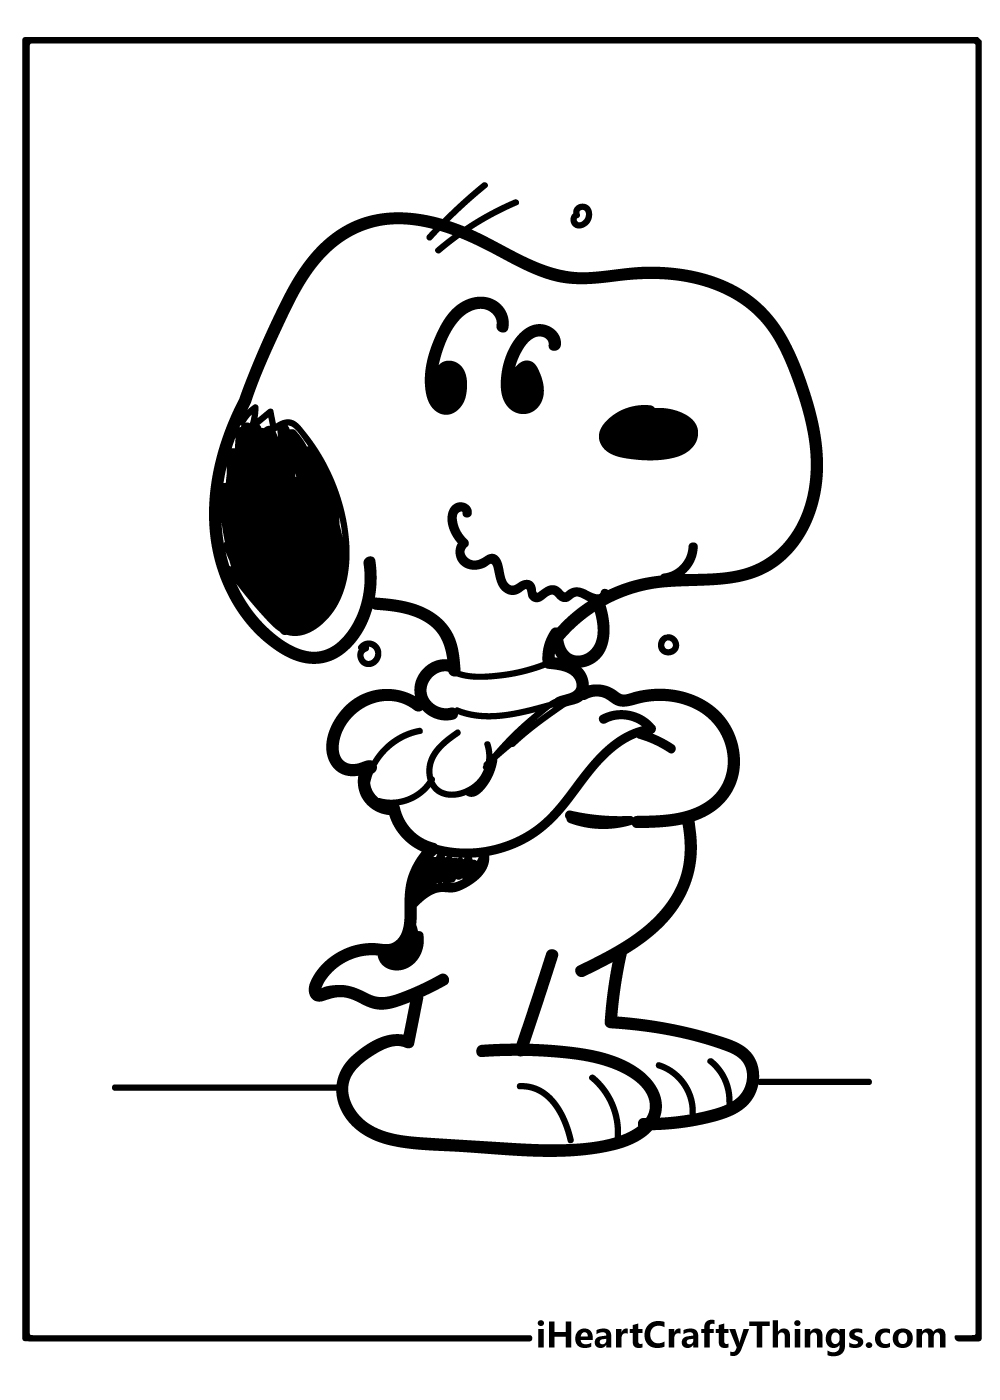 Snoopy Coloring Pages for kids free download